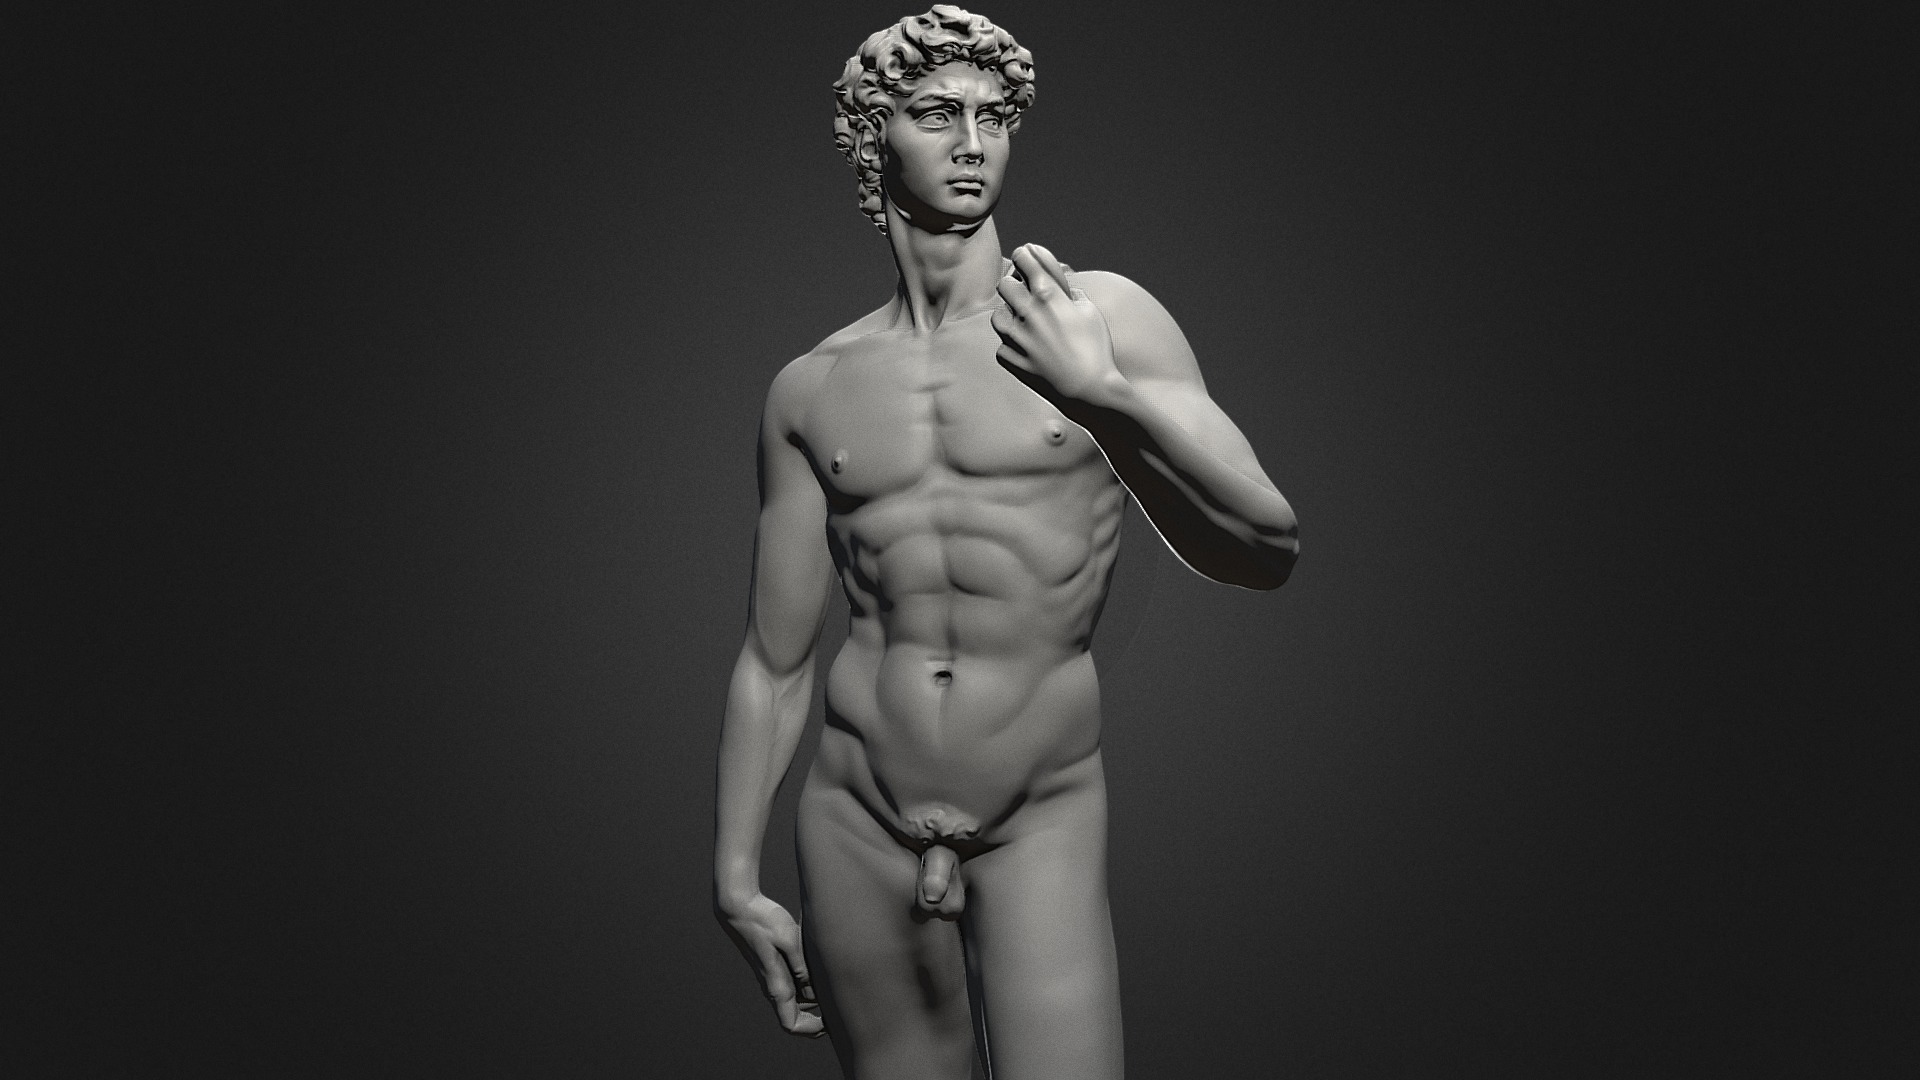 3D model 3d Printable David Statue by Michelangelo - This is a 3D model of the 3d Printable David Statue by Michelangelo. The 3D model is about a statue of a person.